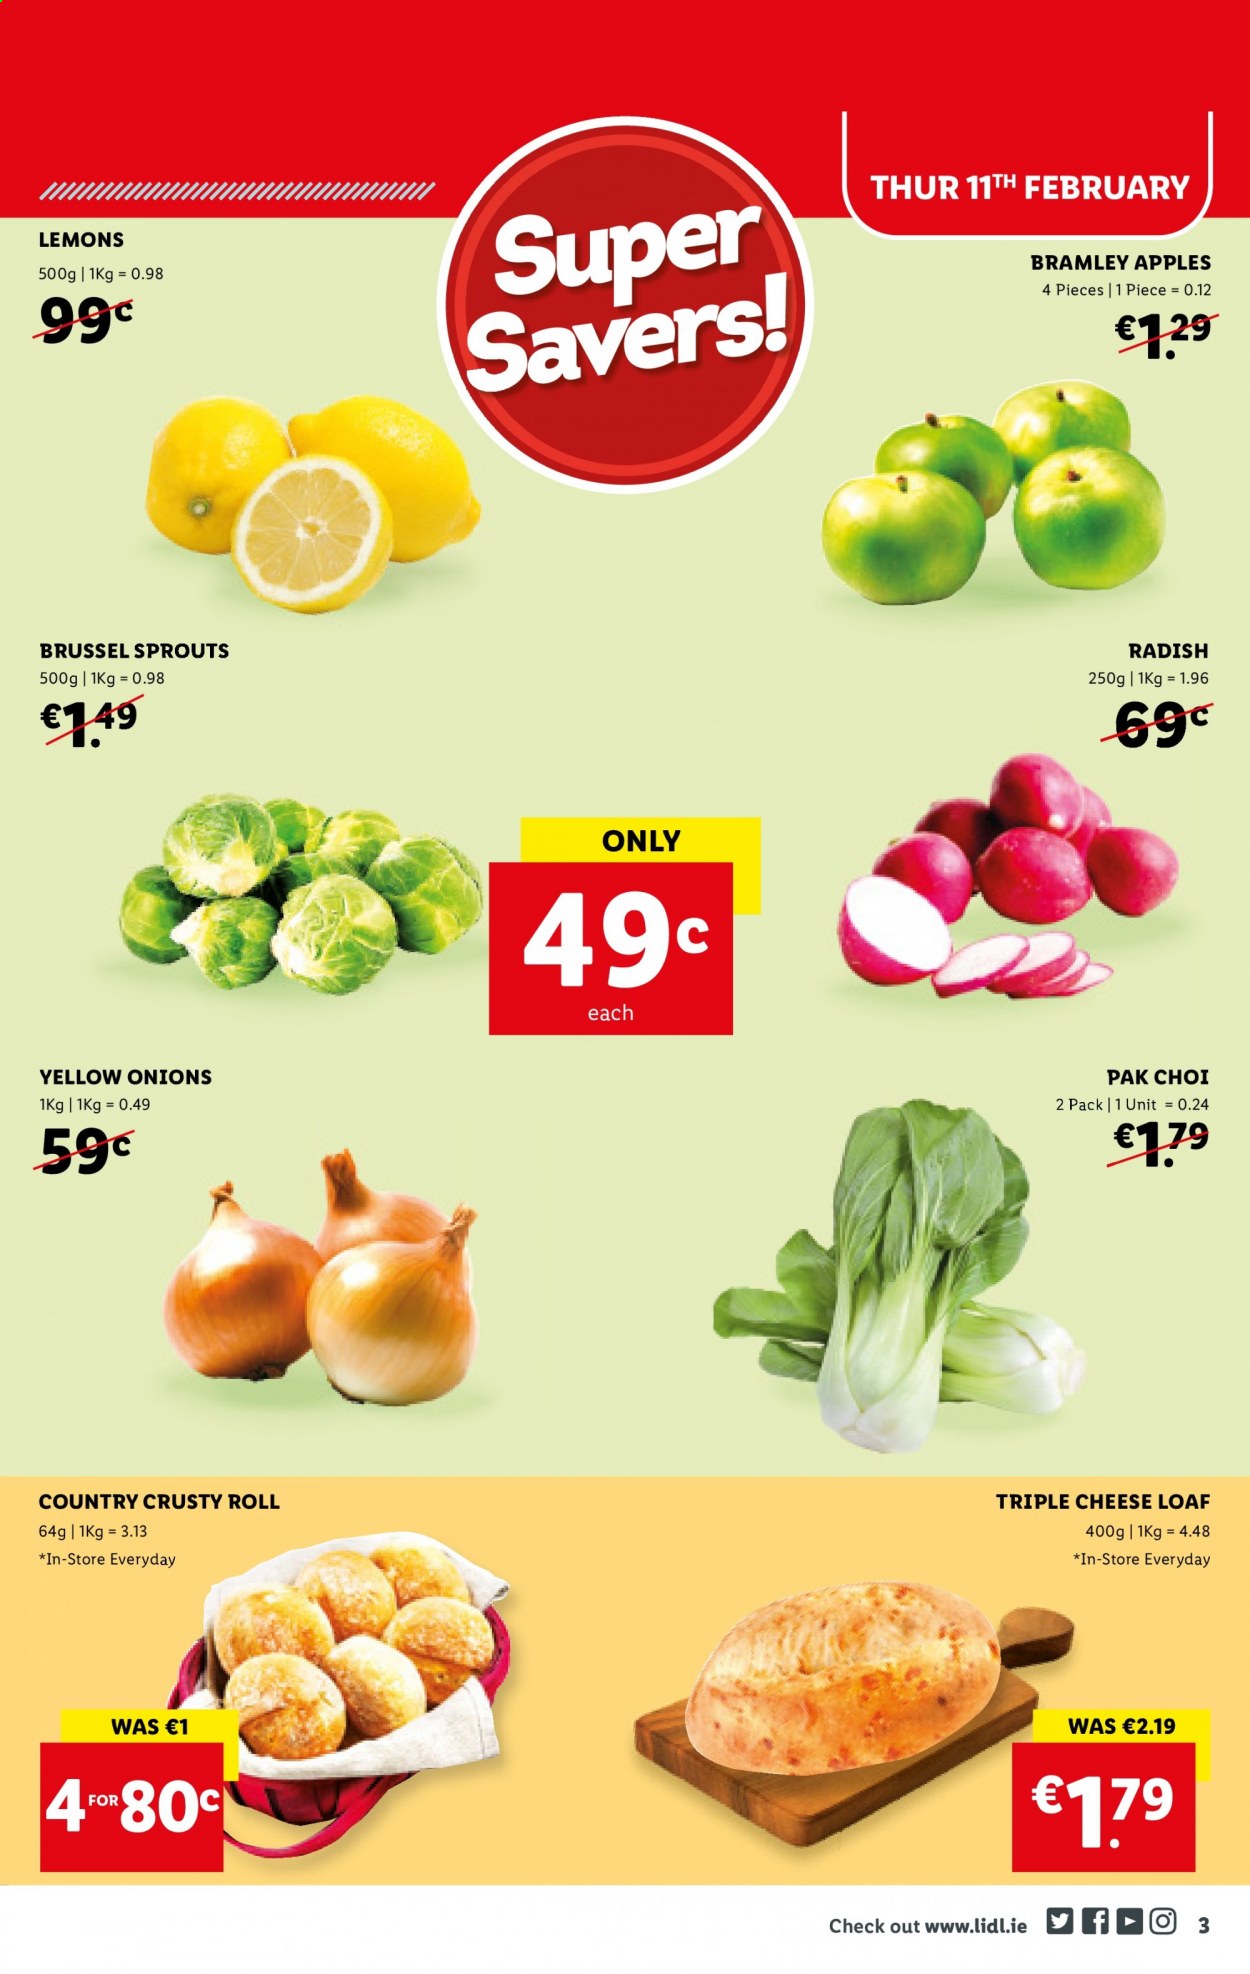 thumbnail - Lidl offer  - 11.02.2021 - 17.02.2021 - Sales products - country crusty rolls, triple cheese bread, radishes, onion, brussel sprouts, apples, lemons. Page 3.